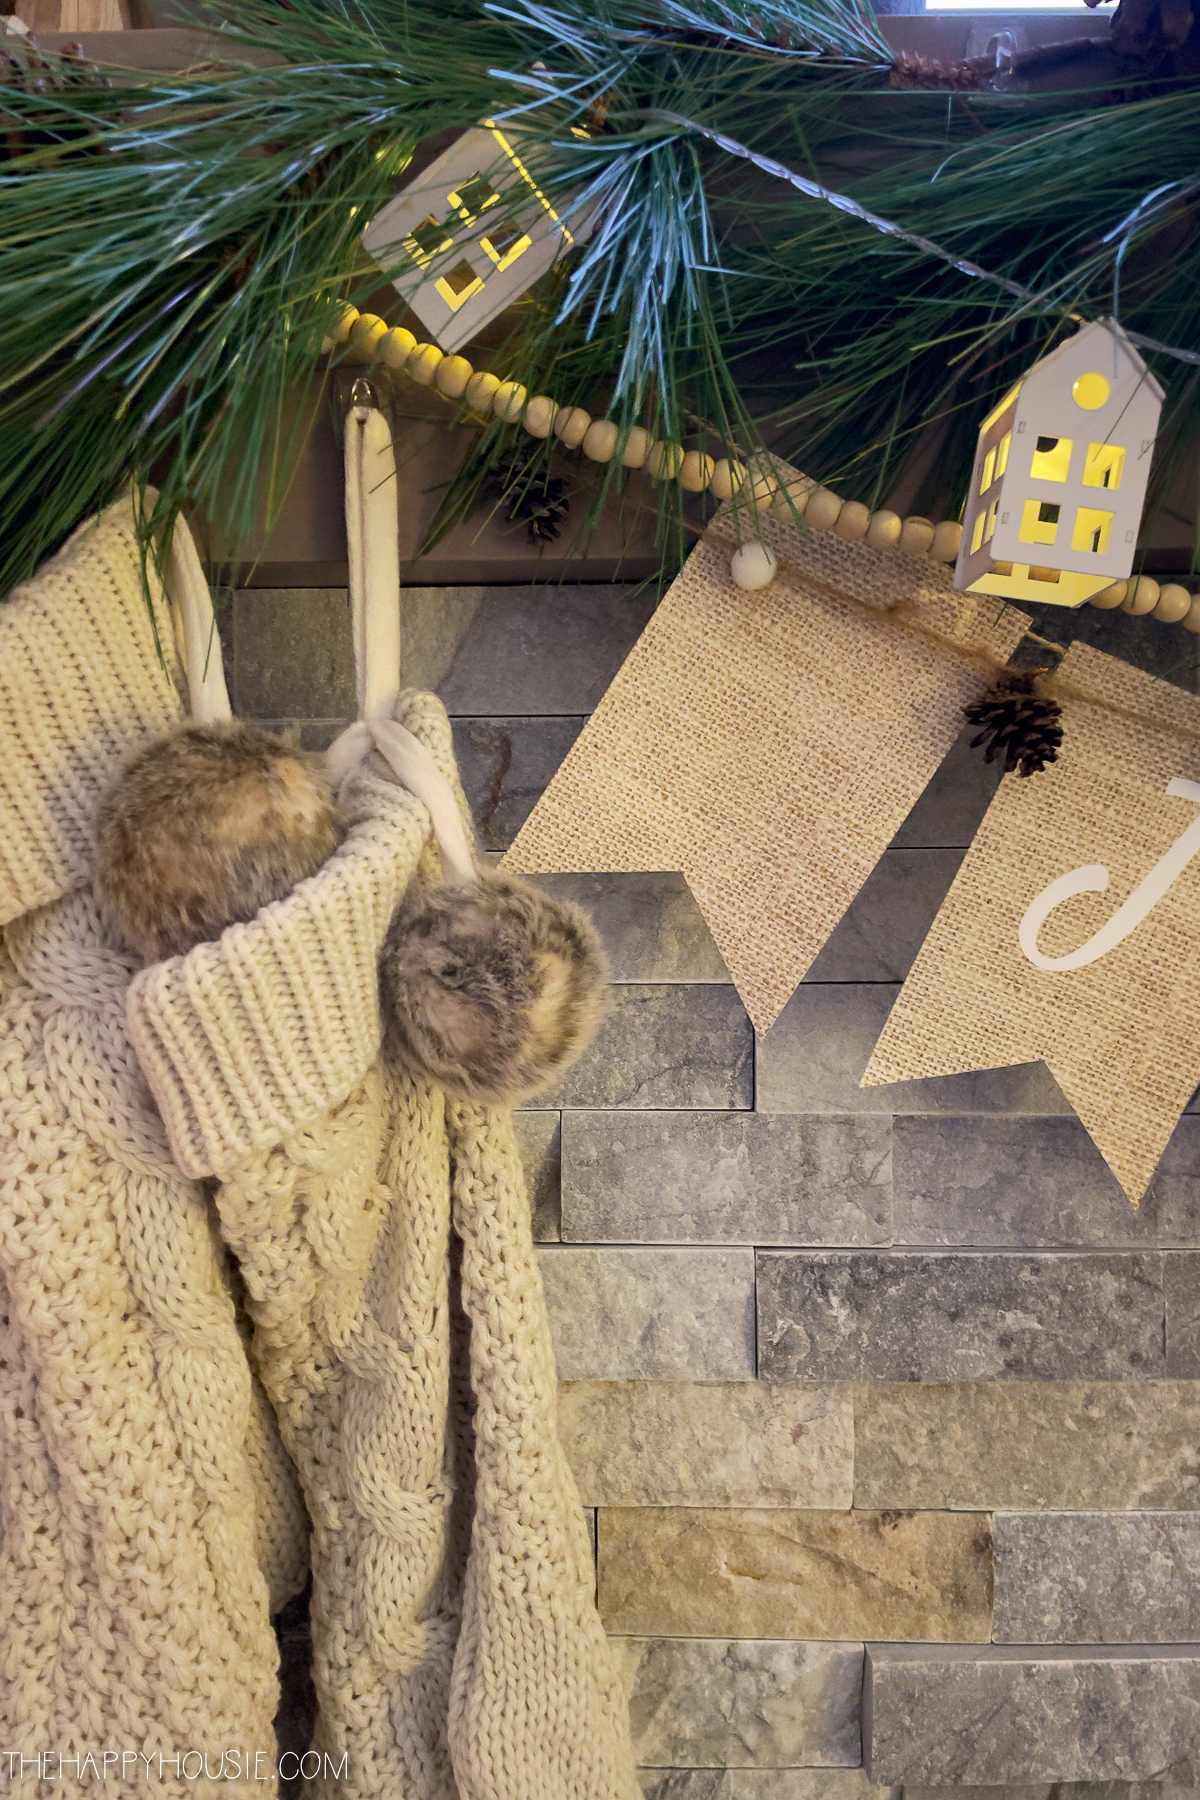 cozy wooden stockings with fur pom poms and Scandi style house lights